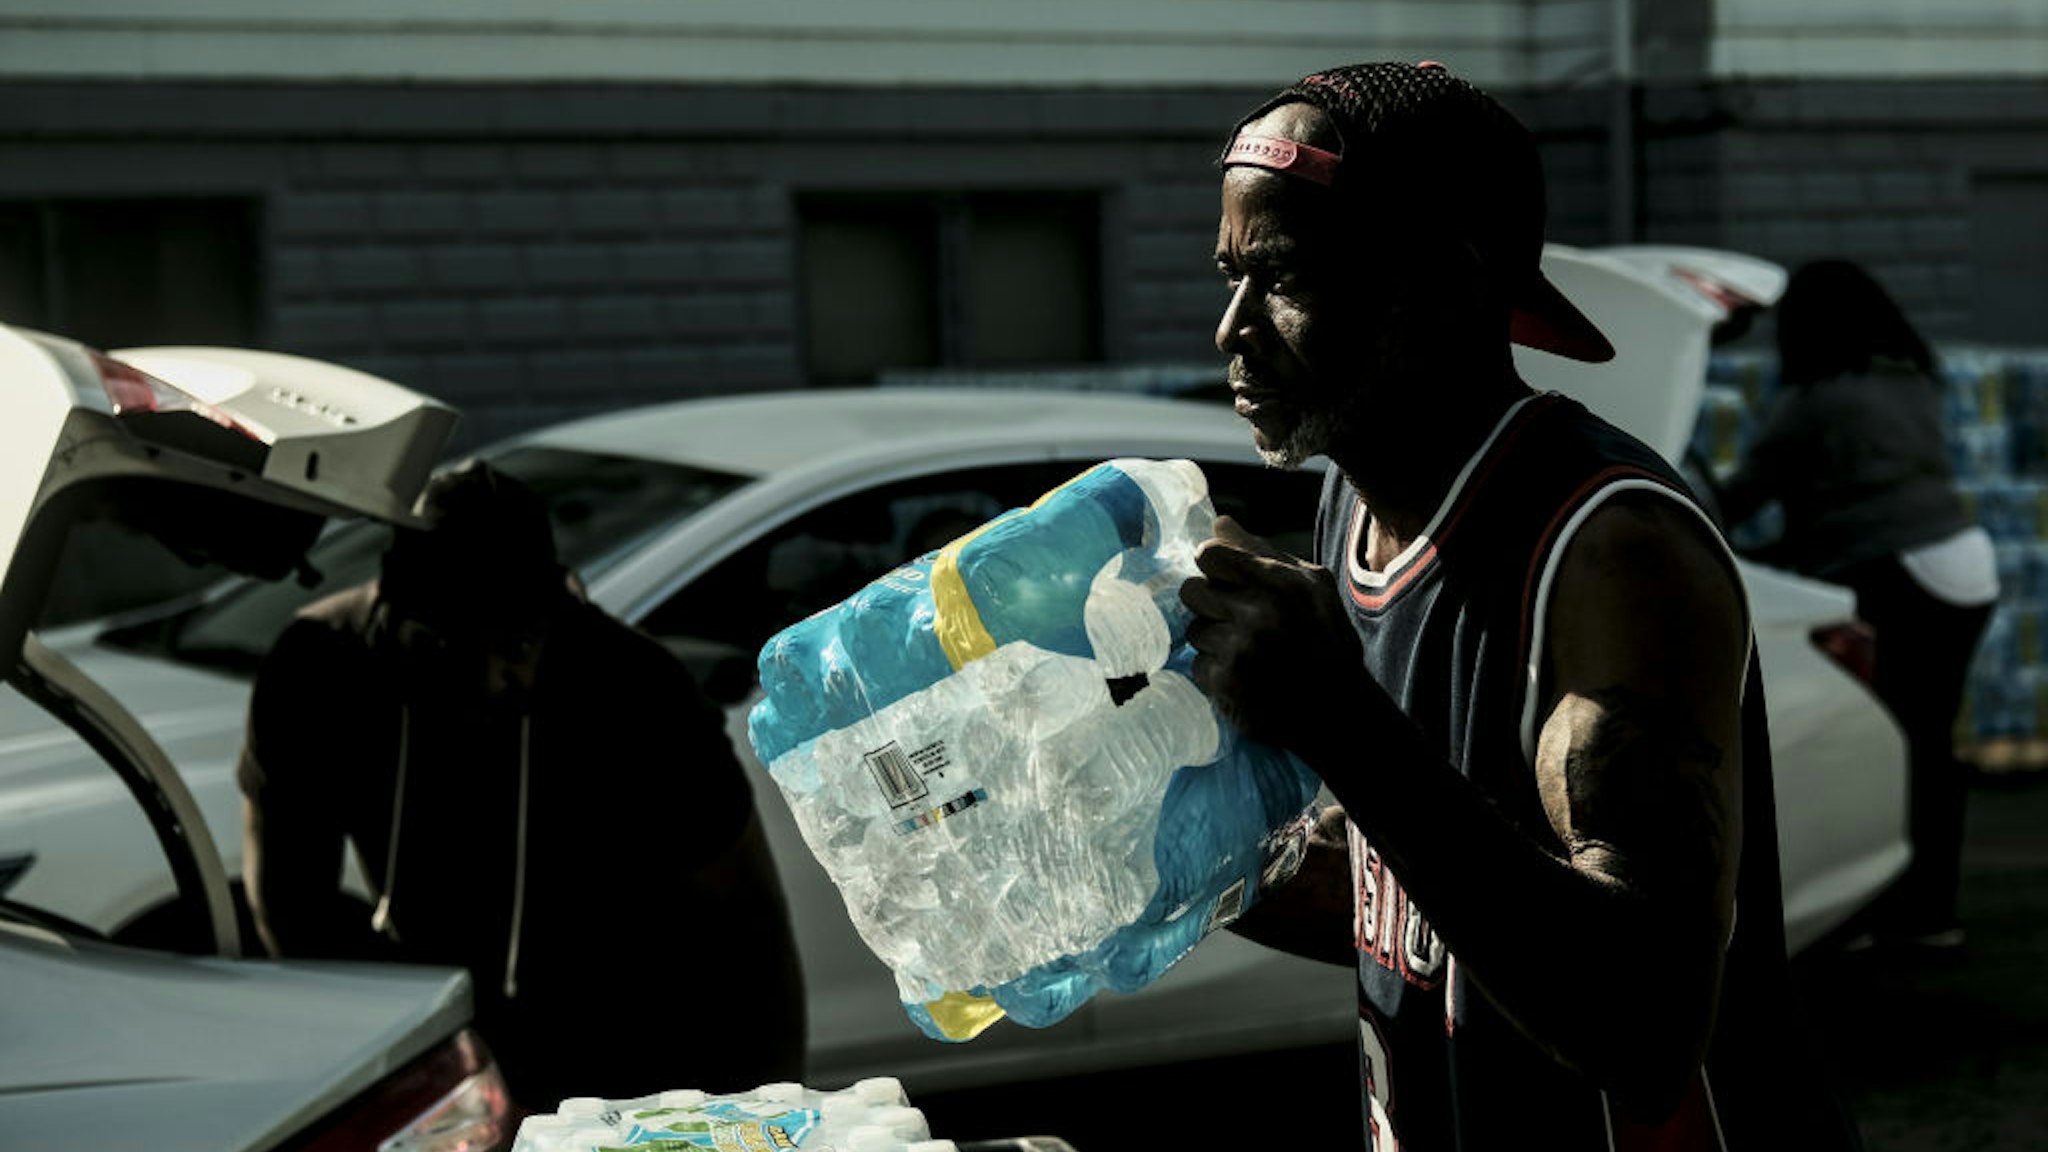 A volunteer distributes bottled water to residents at the Abundant Life Church of God in Benton Harbor, Michigan, U.S., on Tuesday, Oct. 19, 2021. Governor Gretchen Whitmer ordered a whole-of-government response to elevated levels of lead in tap water in the southwestern Michigan city of Benton Harbor and vowed to accelerate the replacement of its lead pipes, reported the Associated Press. Photographer: Matthew Hatcher/Bloomberg via Getty Images